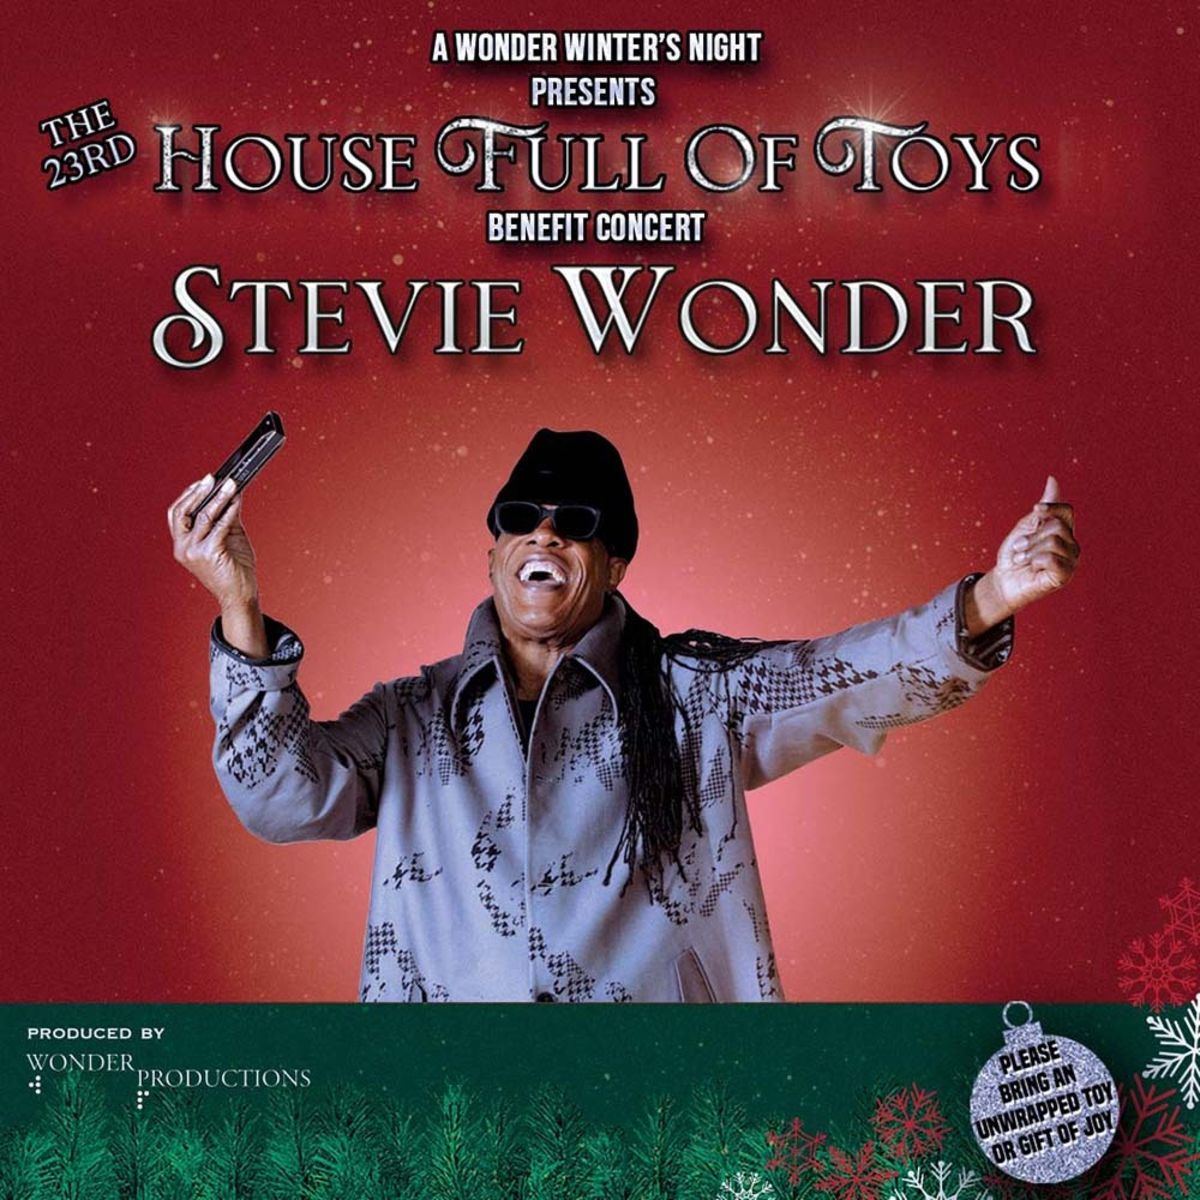 Icon and Superstar, Stevie Wonder returns to Microsoft Theater for his 23rd House Full of Toys Benefit Concert on Saturday Decem